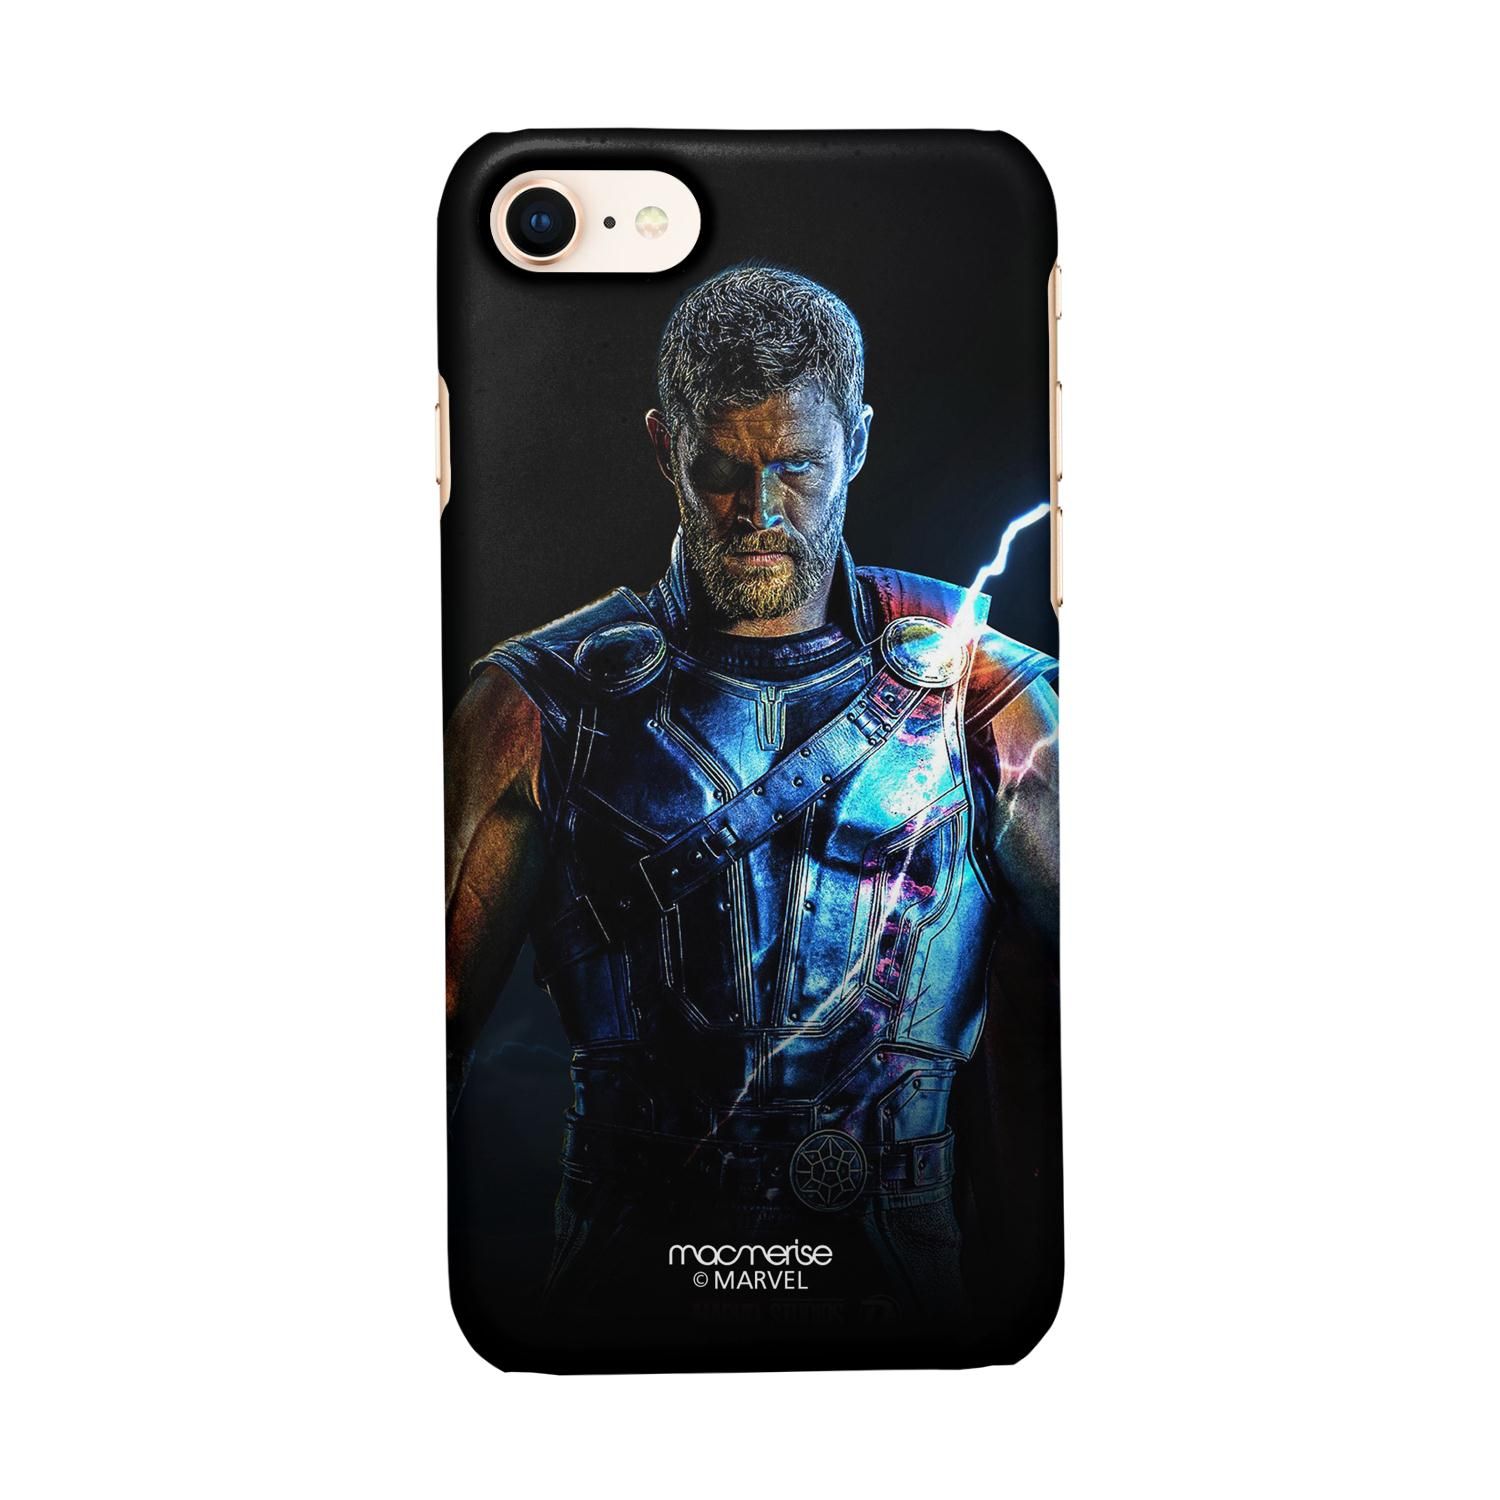 Buy The Thor Triumph - Sleek Phone Case for iPhone 8 Online